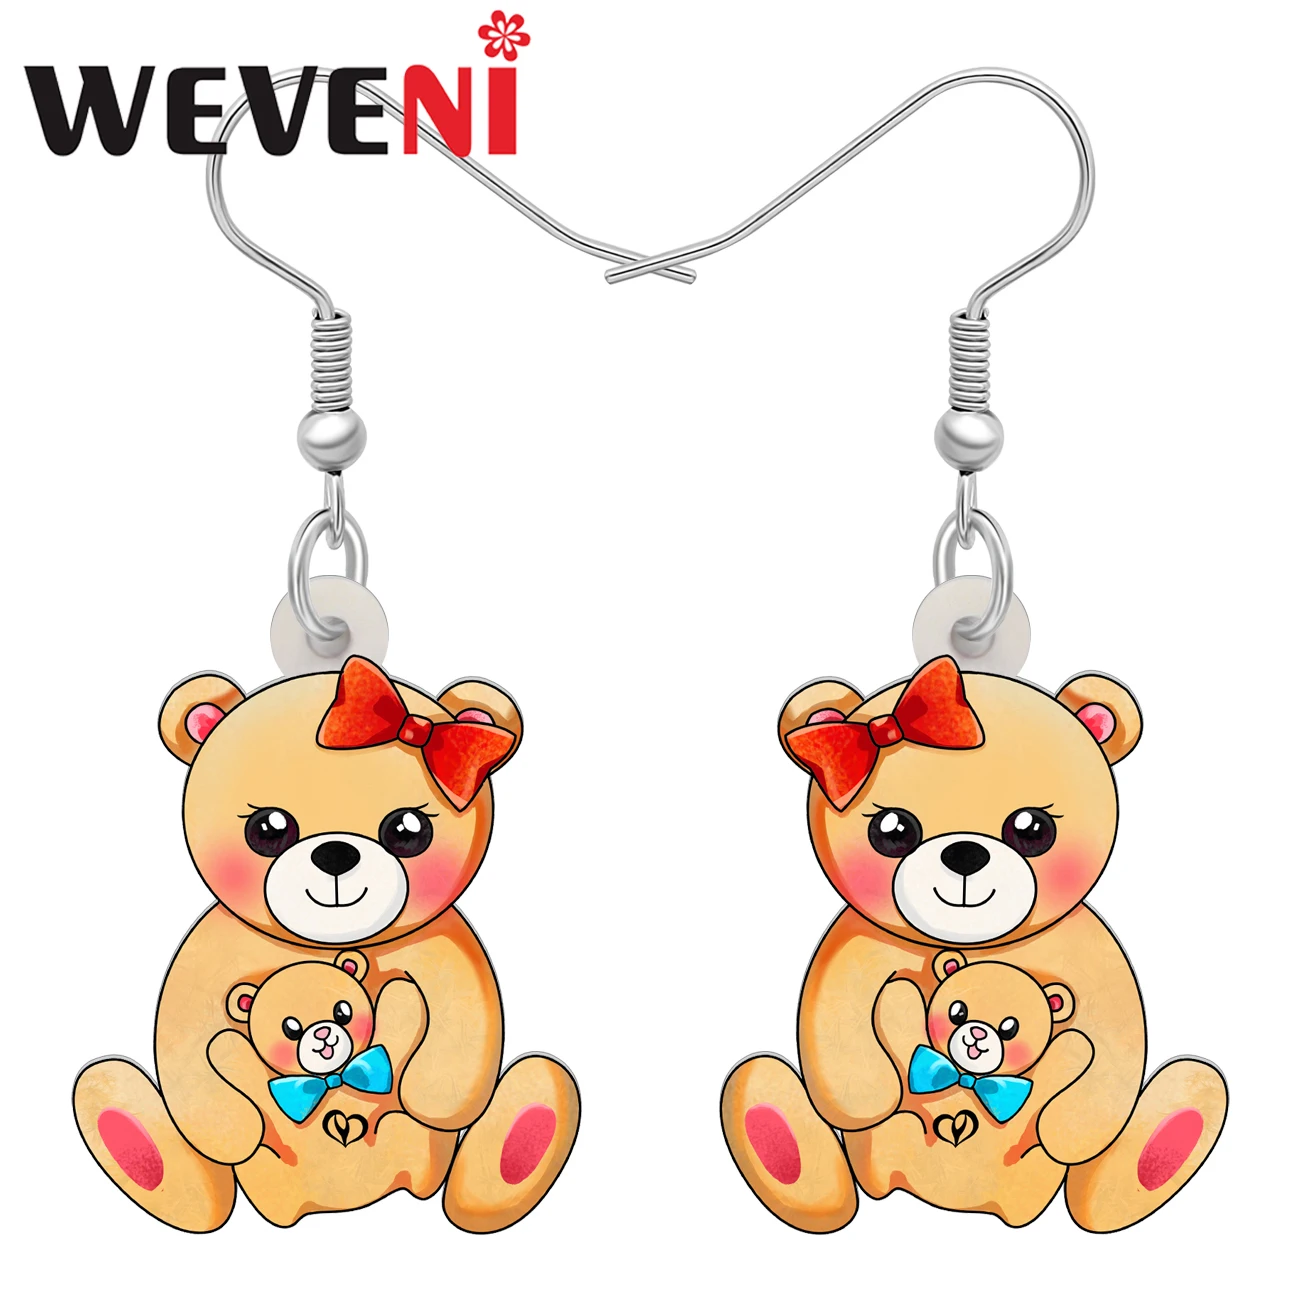 Weveni Acrylic Mothers Day Bear Babay Earrings Novelty Dangle Drop Charms Decorations Jewelry For Women Girls Gifts Accessories